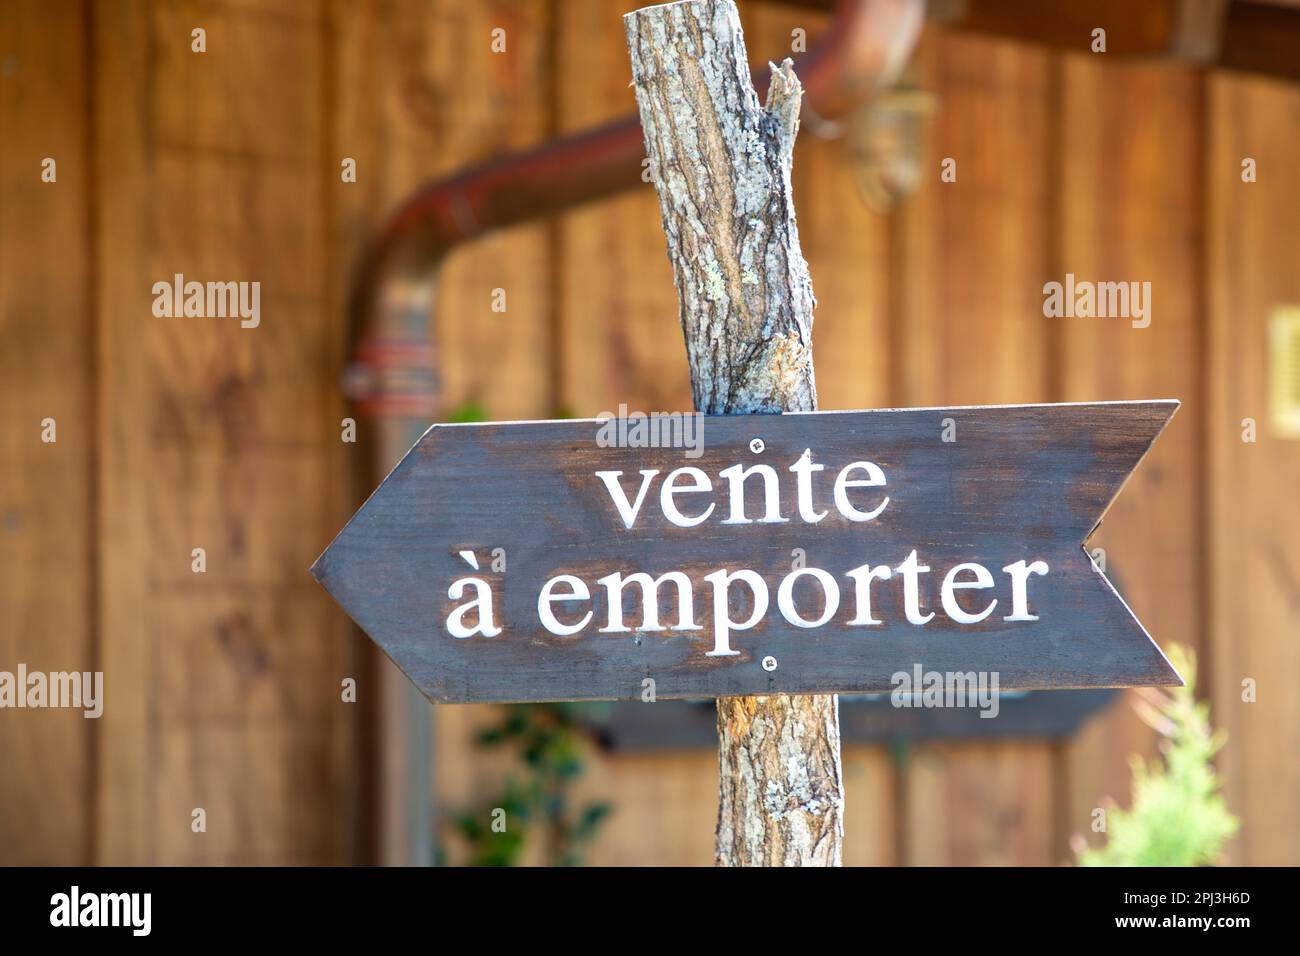 vente a emporter sign text means takeaway in wooden arrow outdoor fastfood restaurant Stock Photo